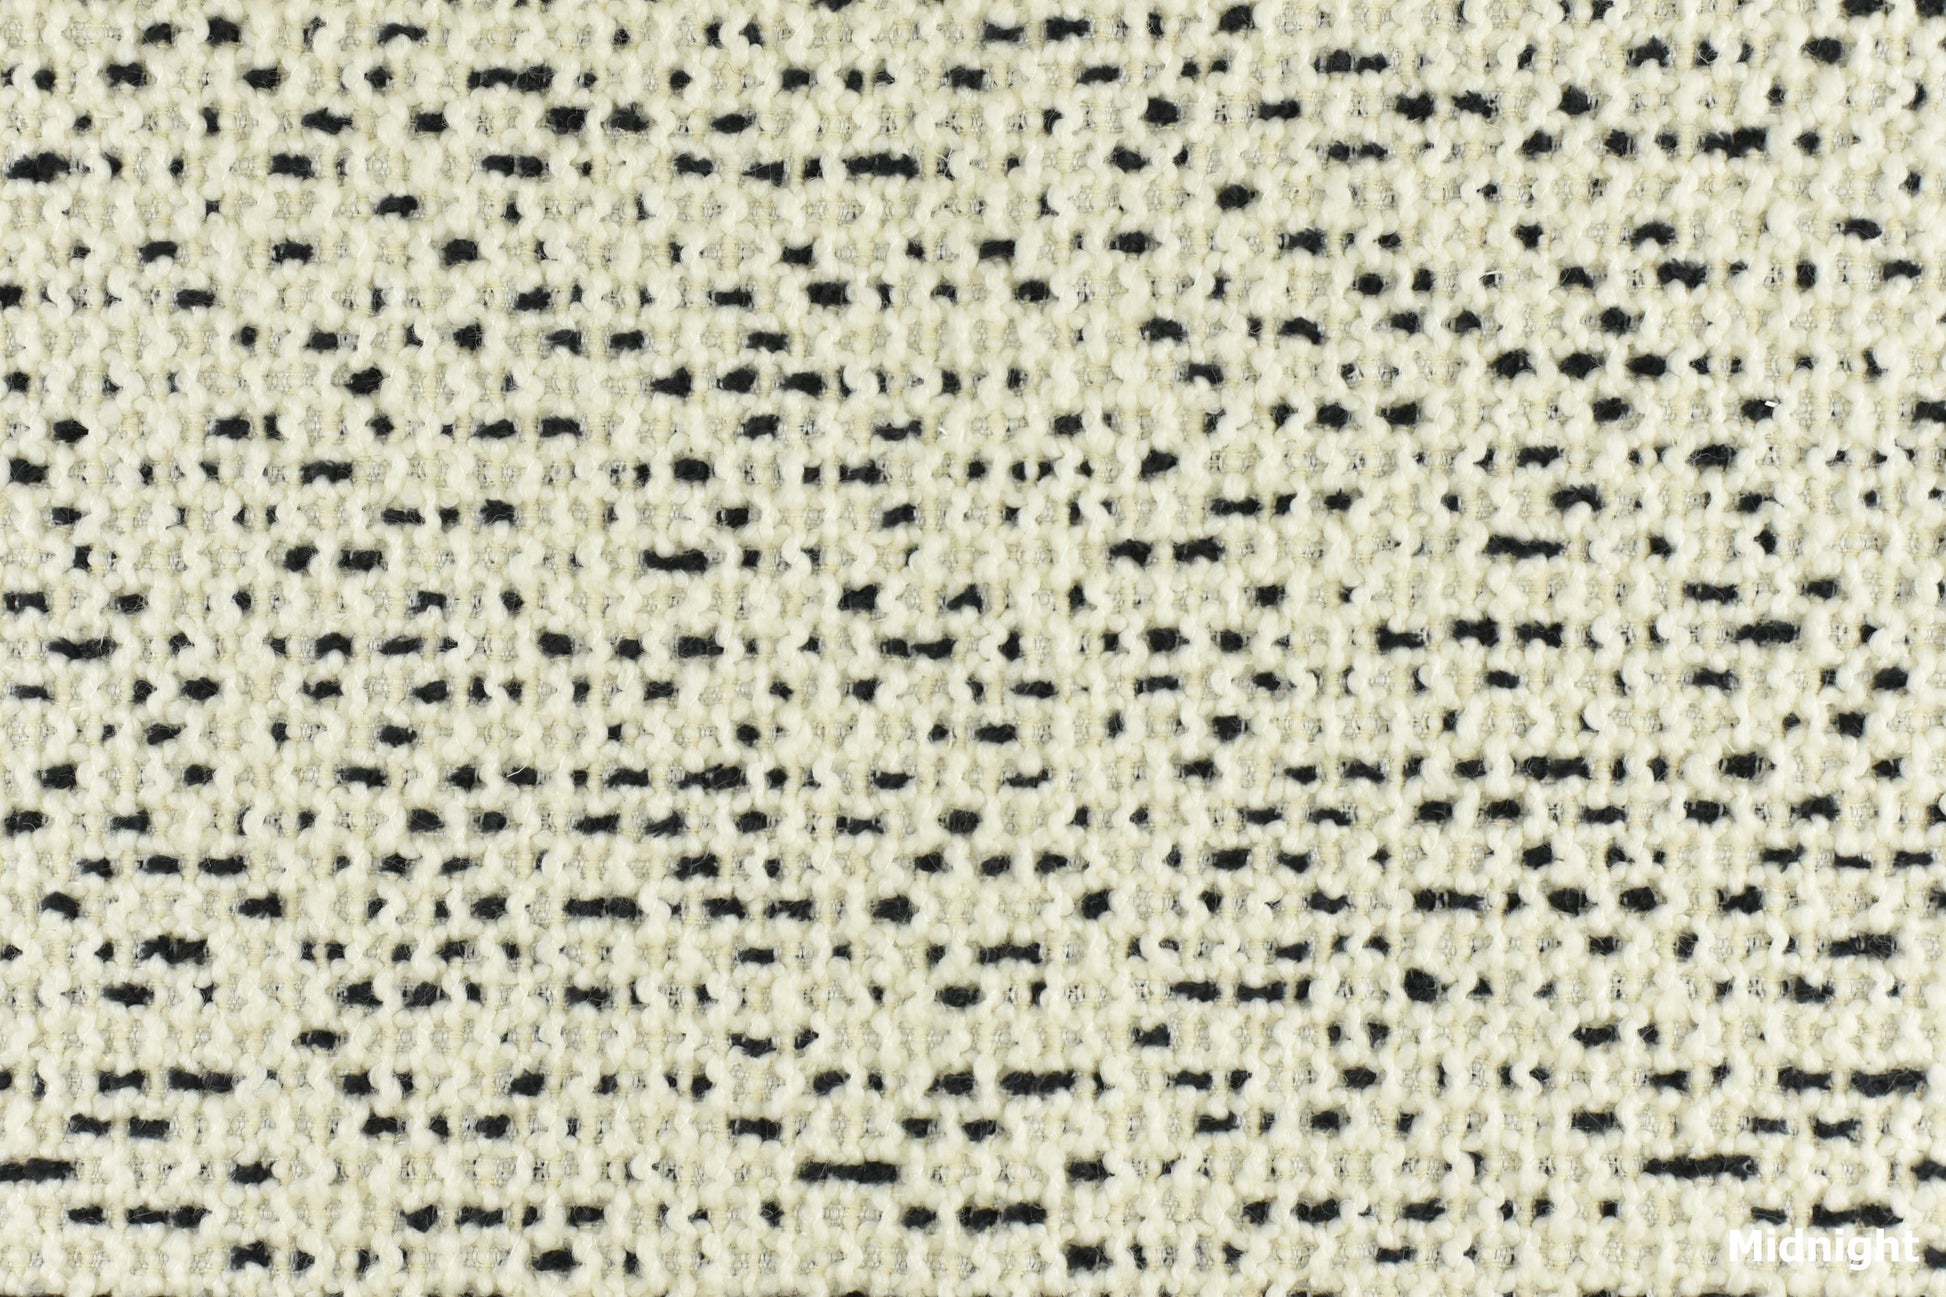 Black and White Dot Textured Wool Linen Cotton Blend Upholstery Fabric in More Colors